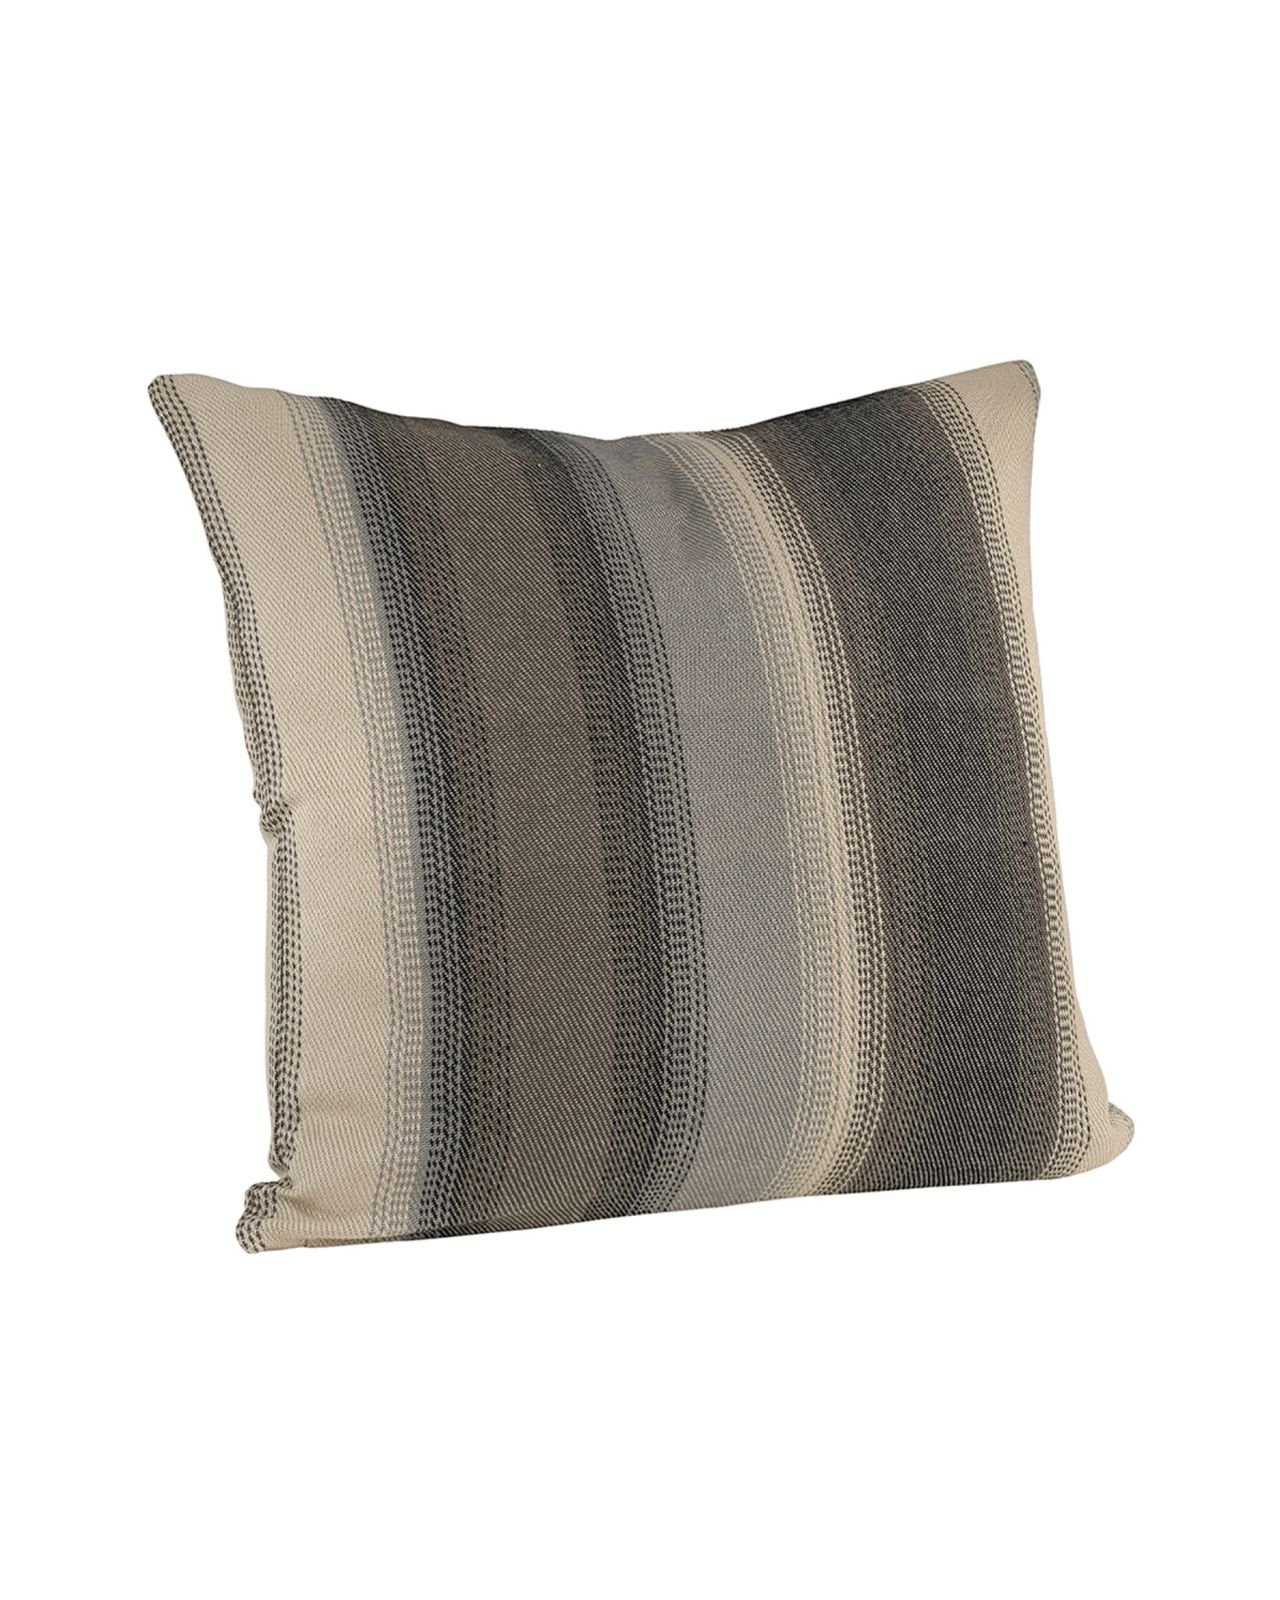 Adonis cushion cover brown